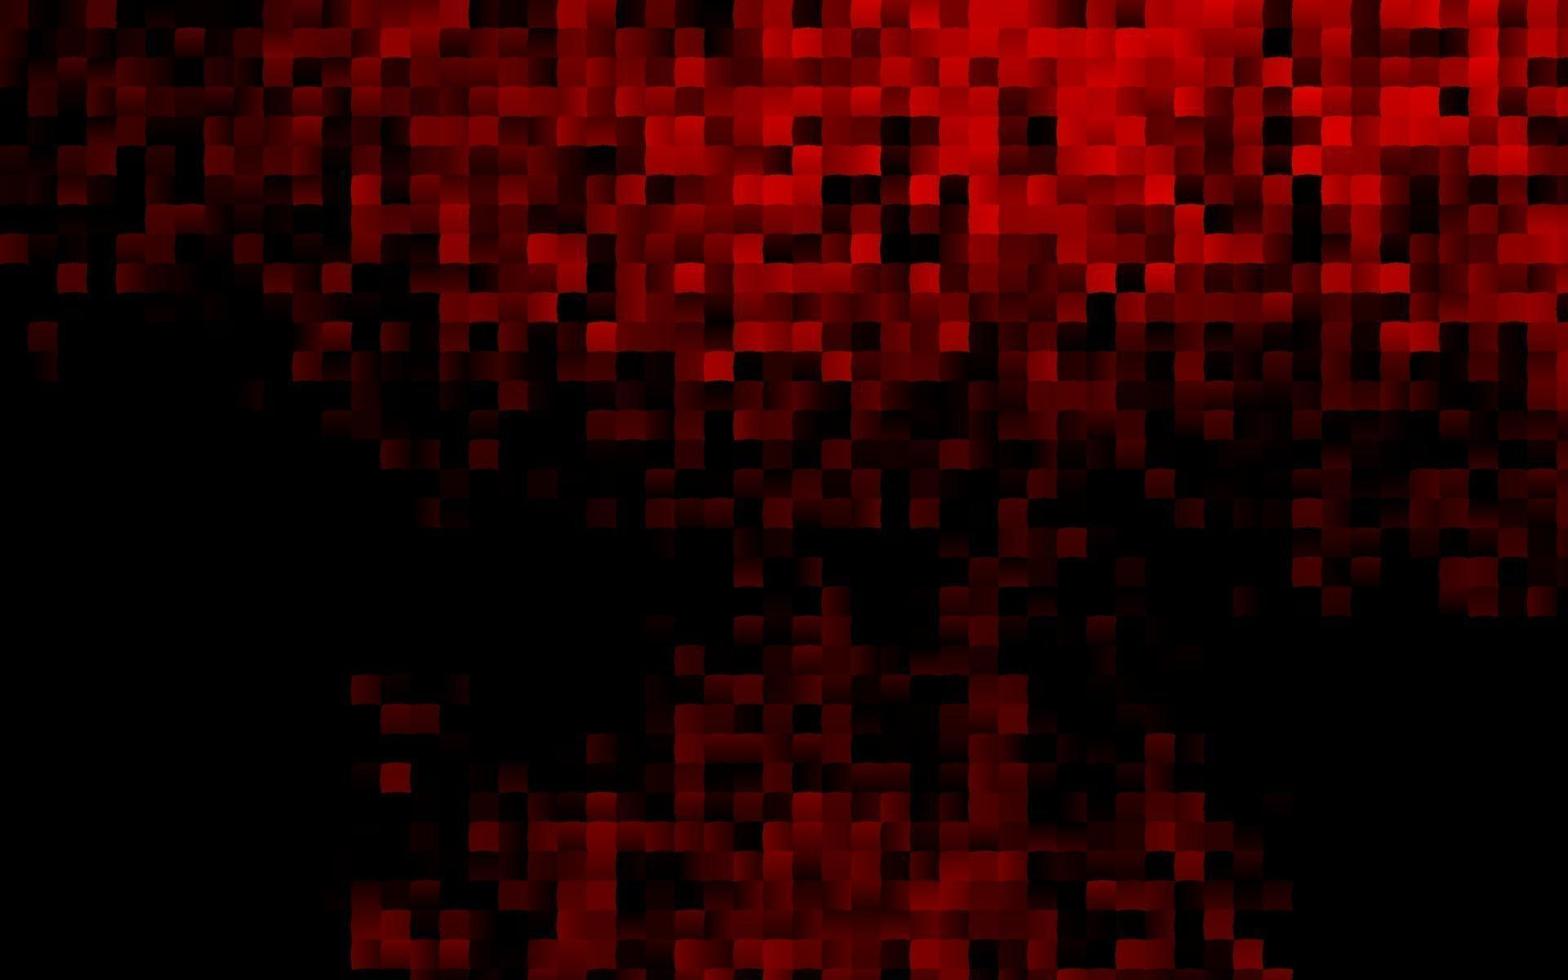 Dark Red vector backdrop with rectangles, squares.